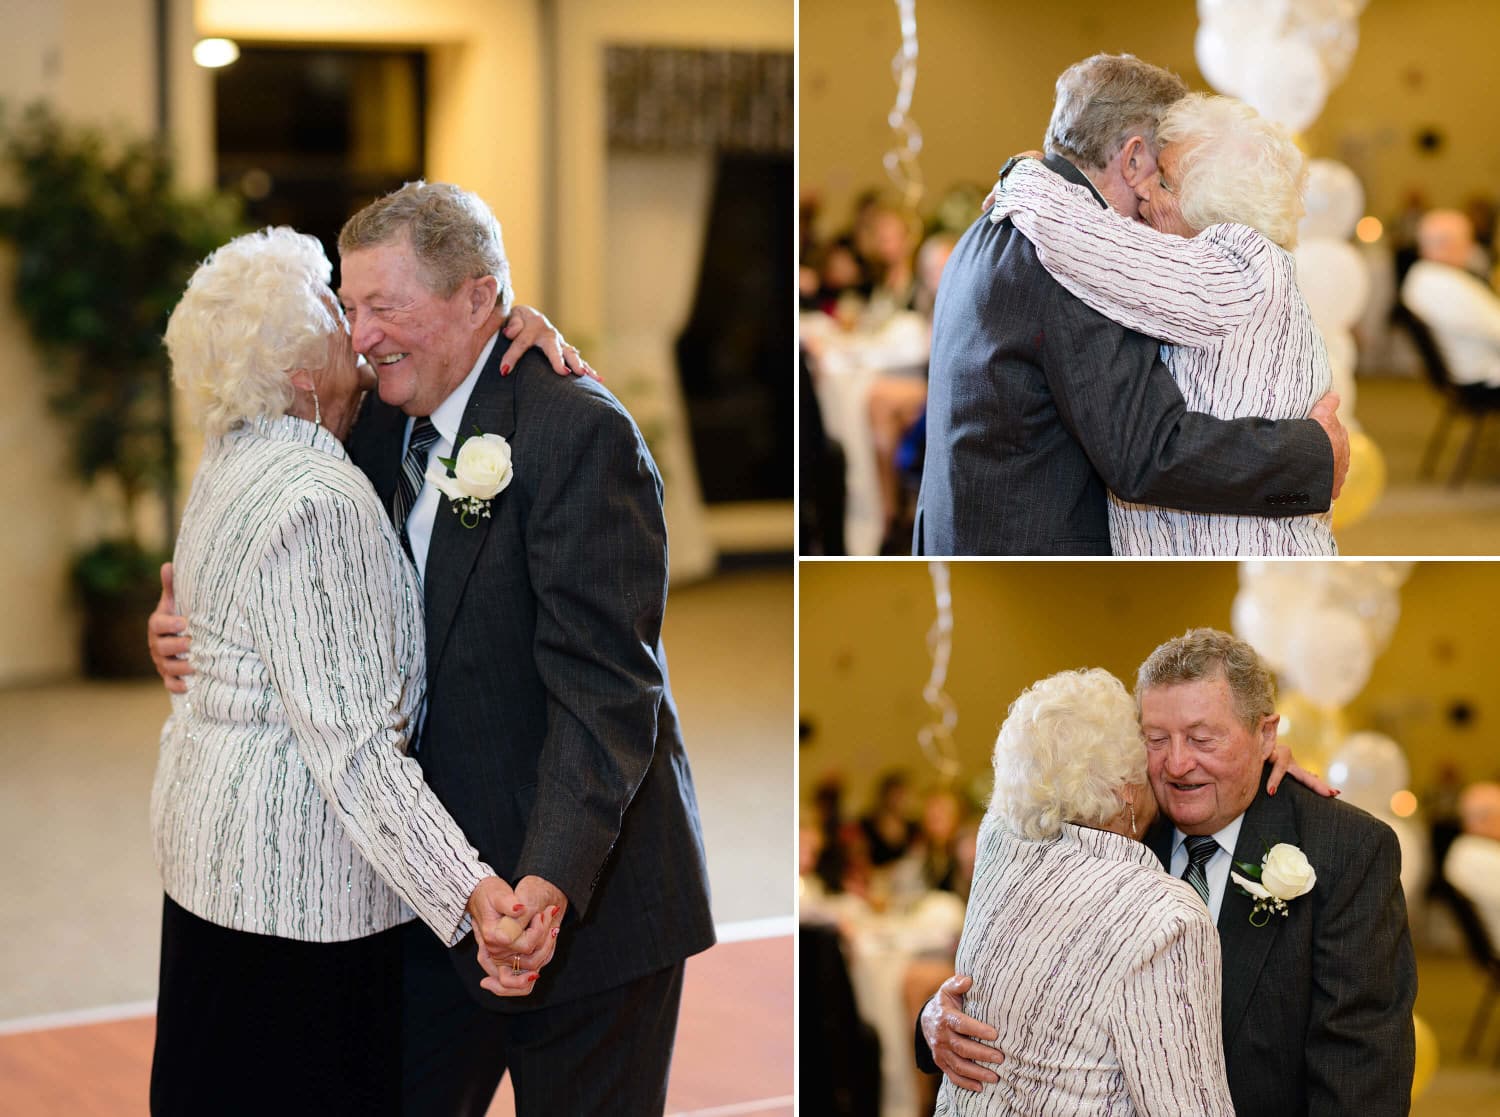 Emotional first dance for older couple at Springmaid Beach